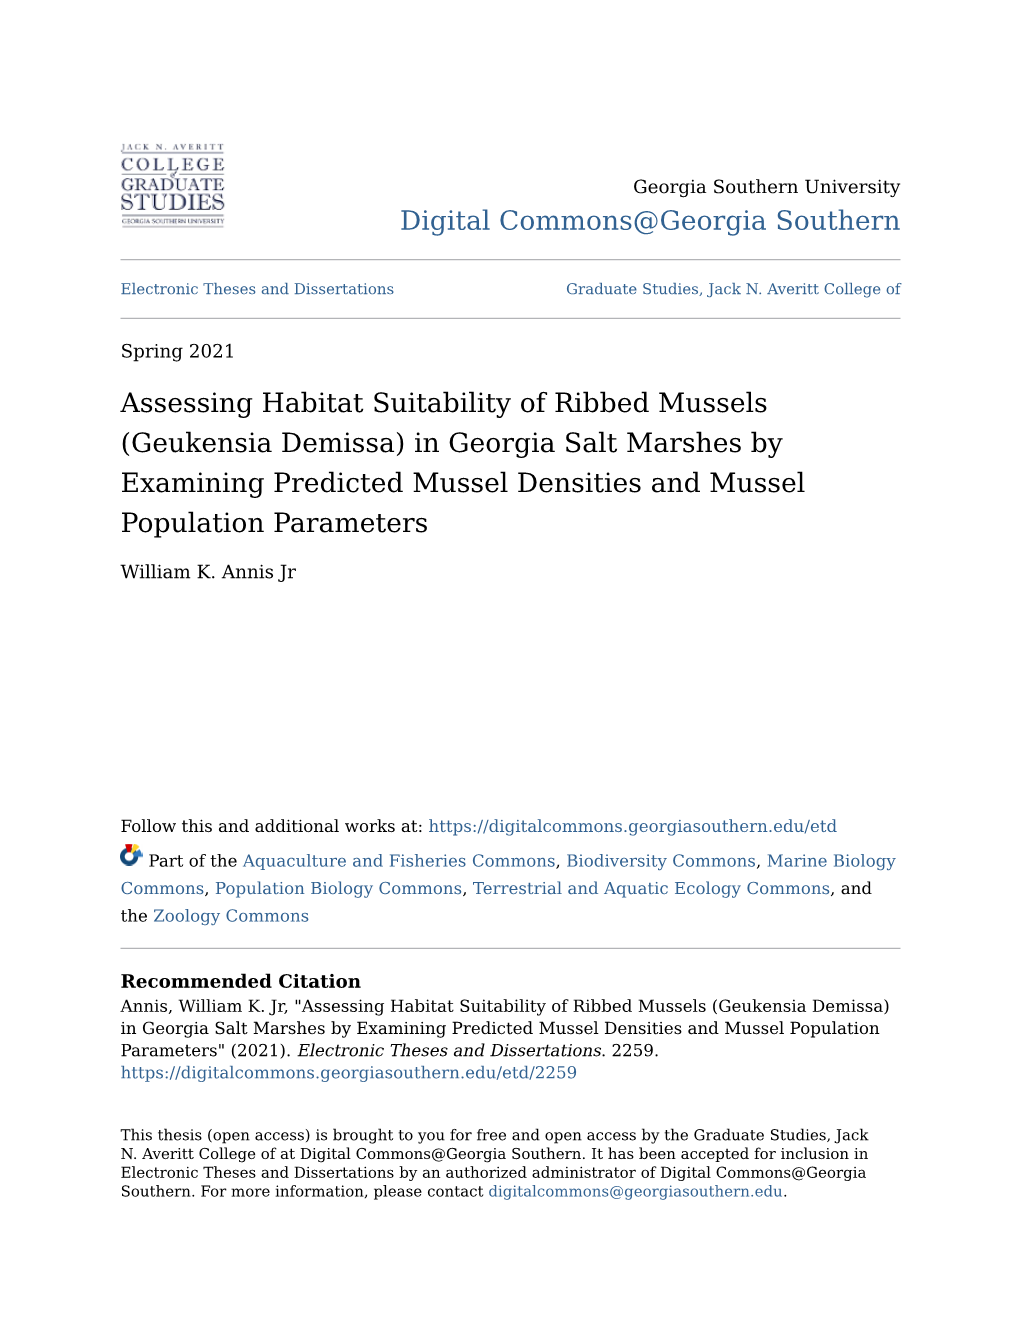 Assessing Habitat Suitability of Ribbed Mussels (Geukensia Demissa) in Georgia Salt Marshes by Examining Predicted Mussel Densities and Mussel Population Parameters